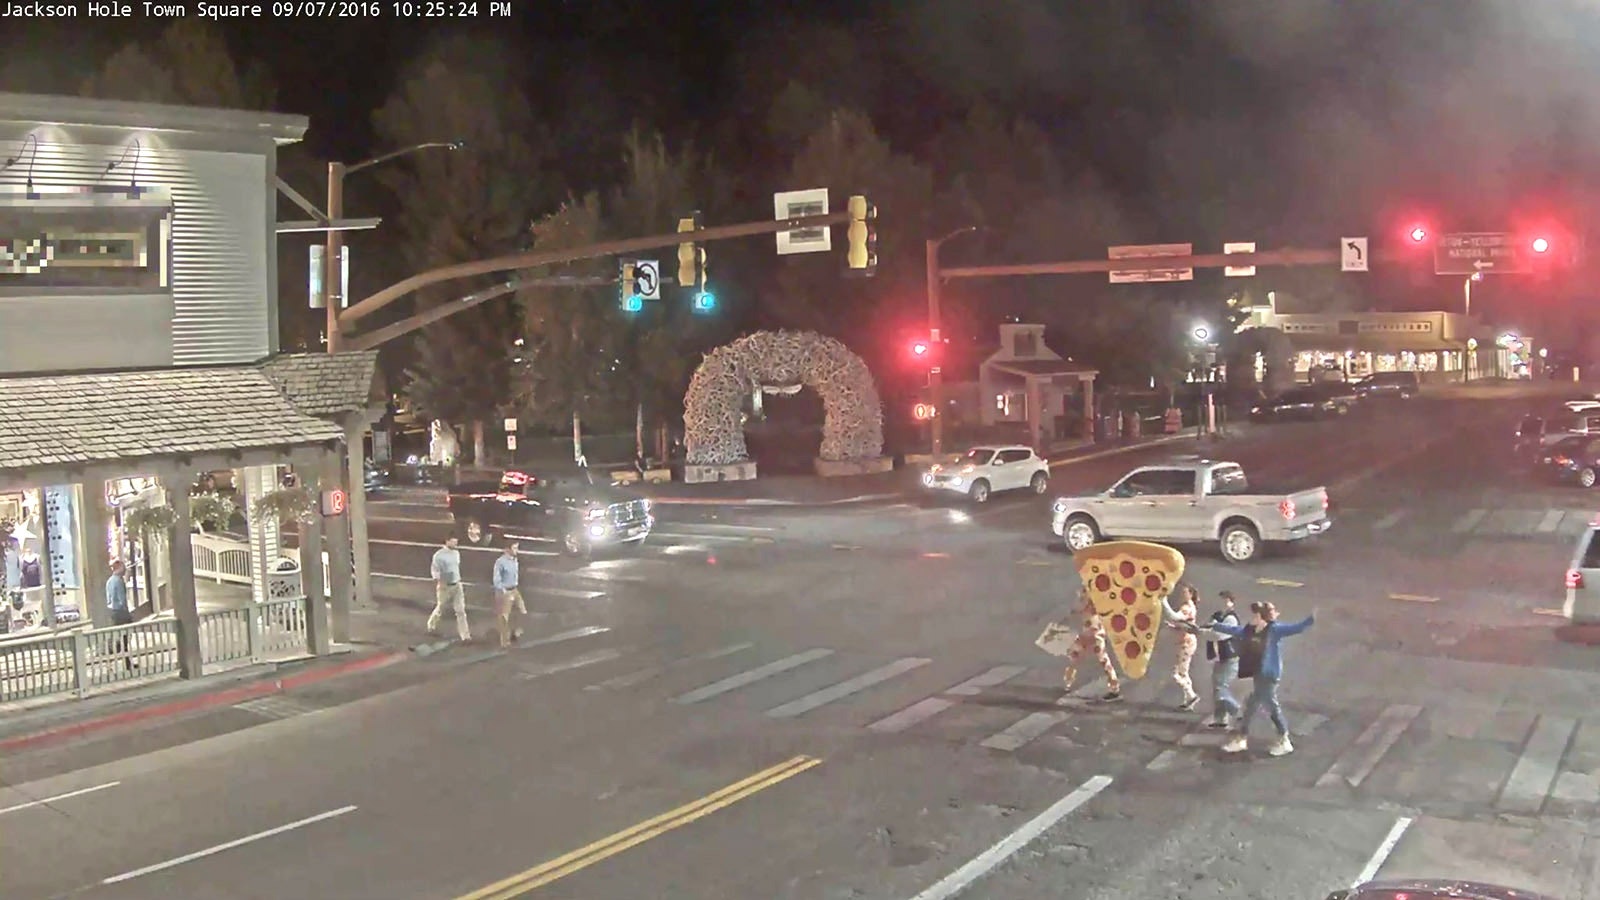 Beginning in fall 2016, people cosplaying on the Jackson Hole webcams became a thing.